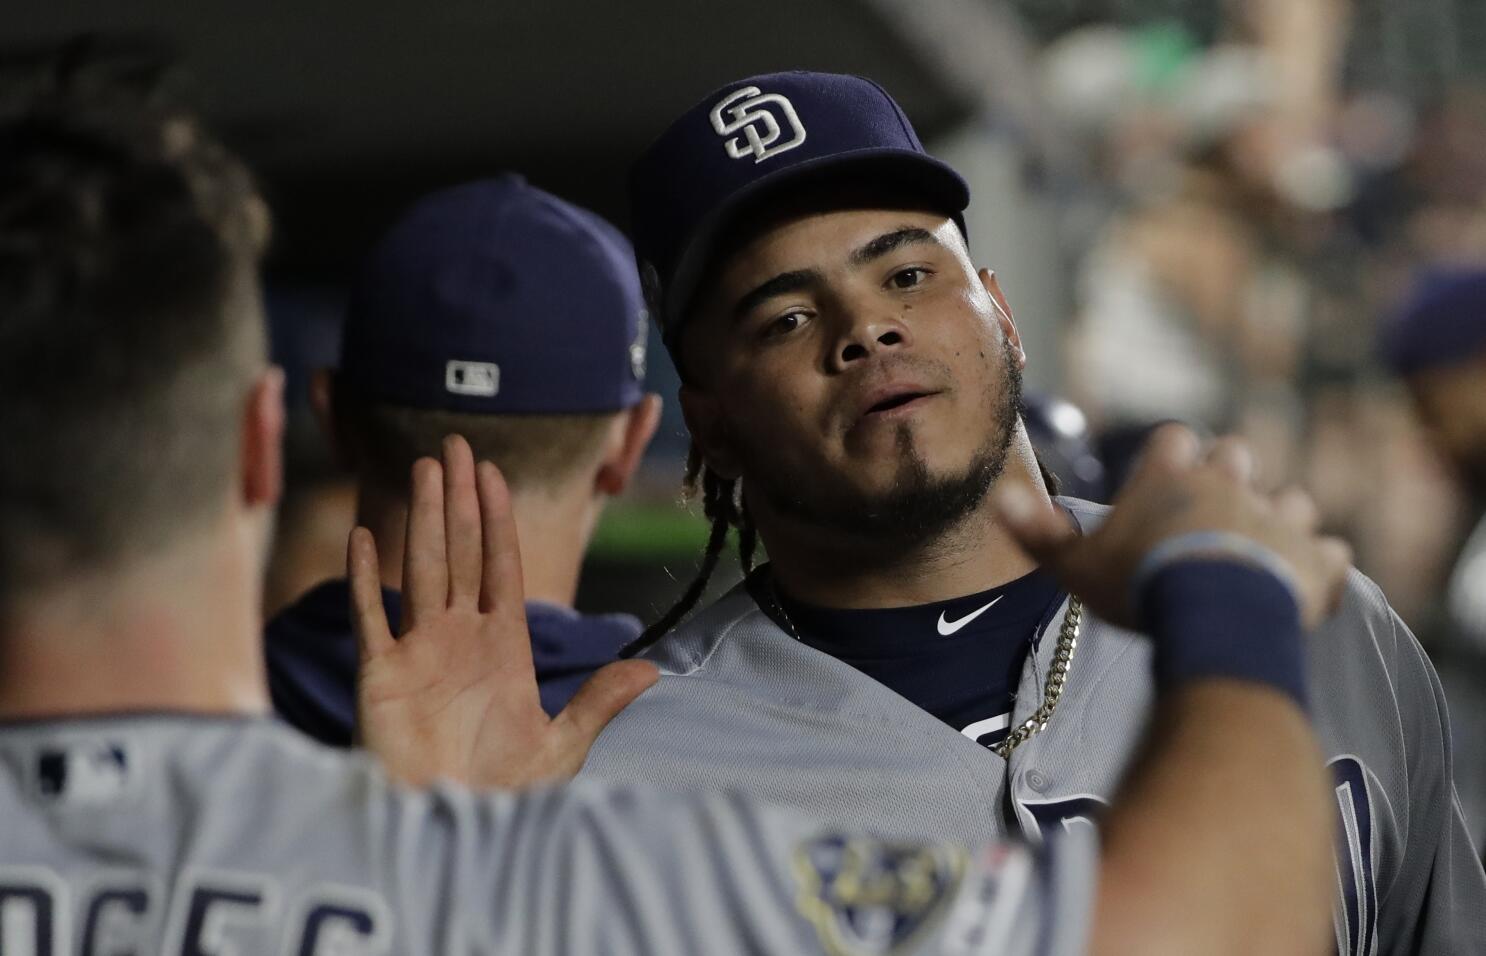 Padres roster review: Dinelson Lamet - The San Diego Union-Tribune